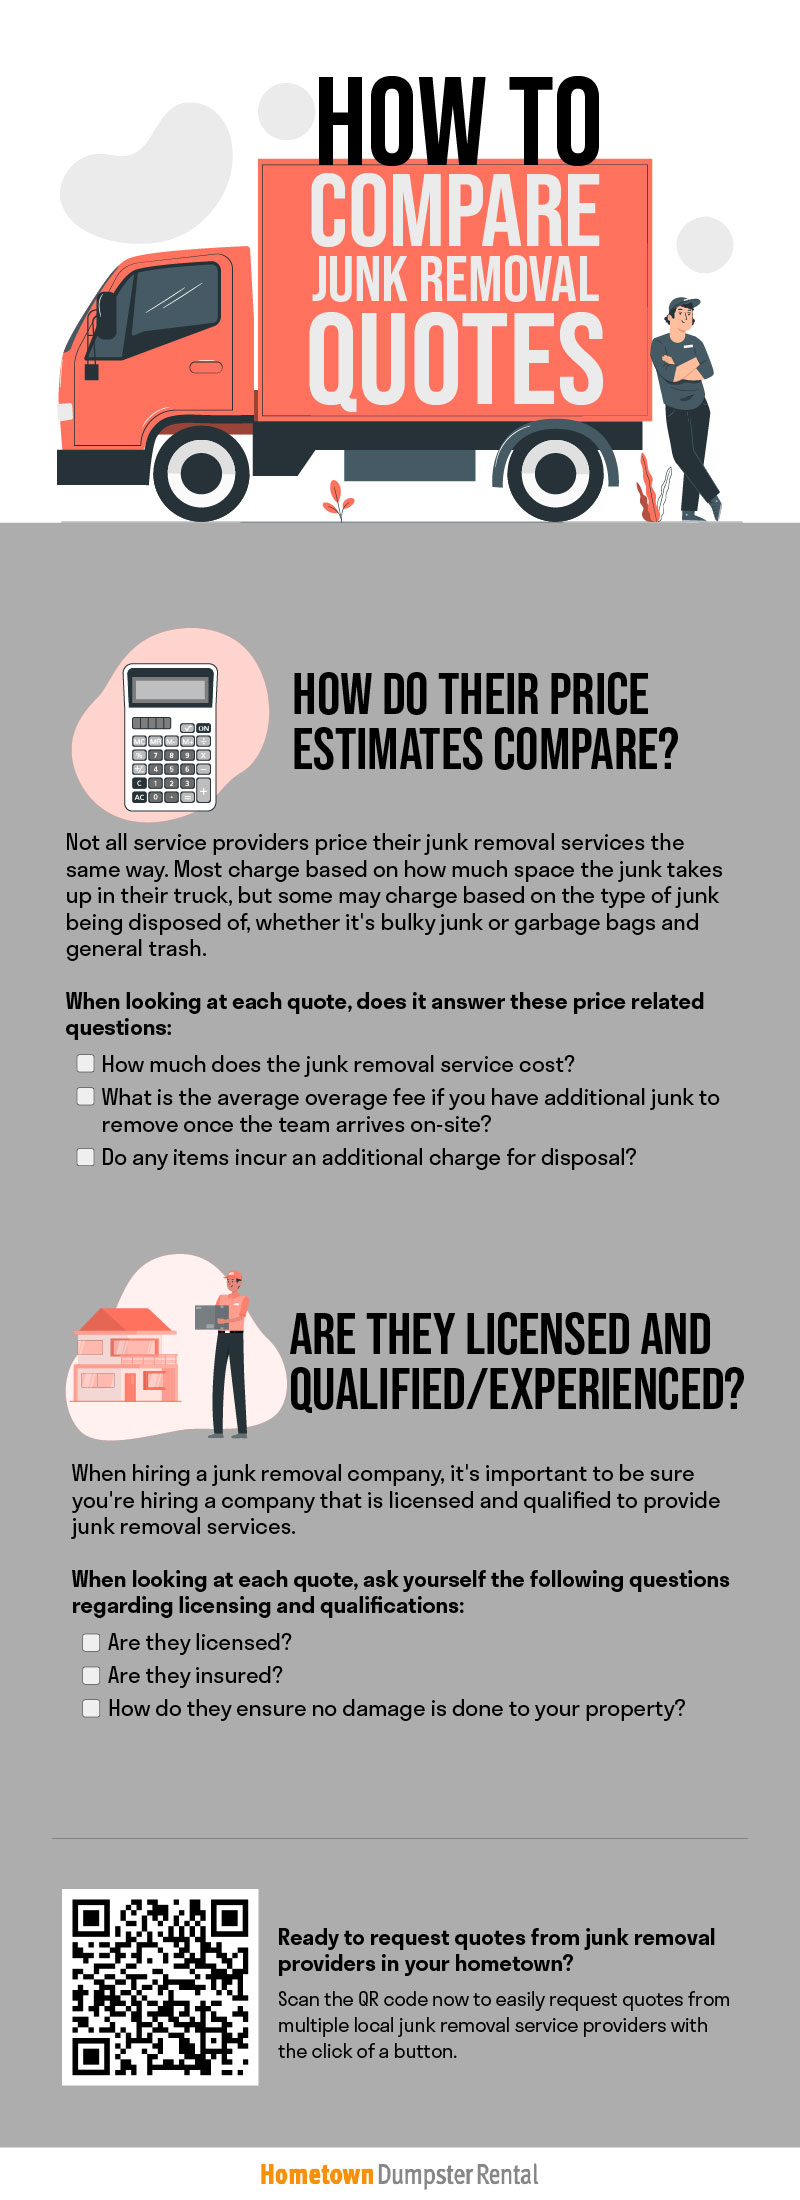 how to compare junk removal quotes infographic